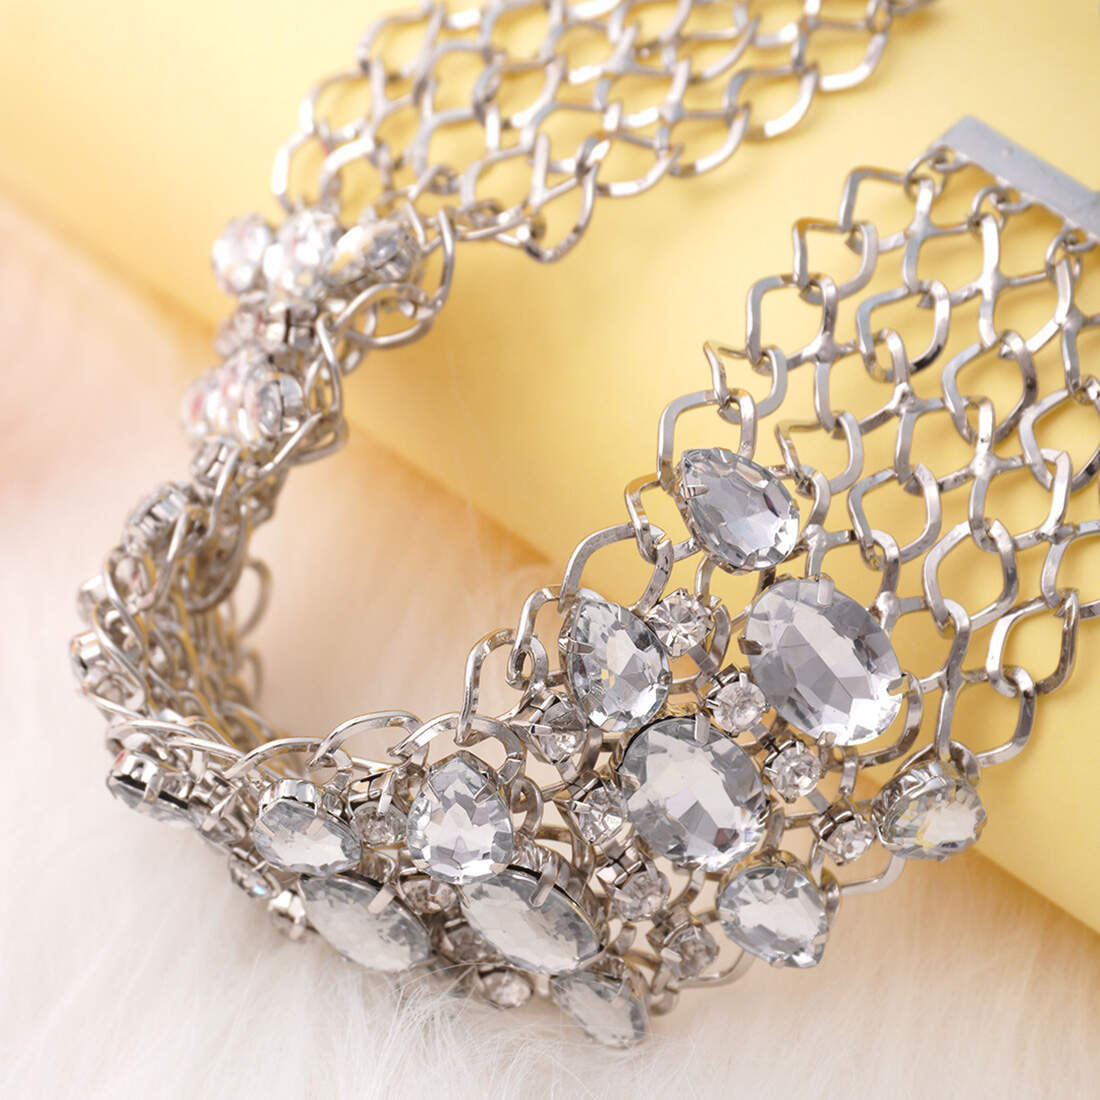 Baroque Crystal Studded Statement Silver Choker